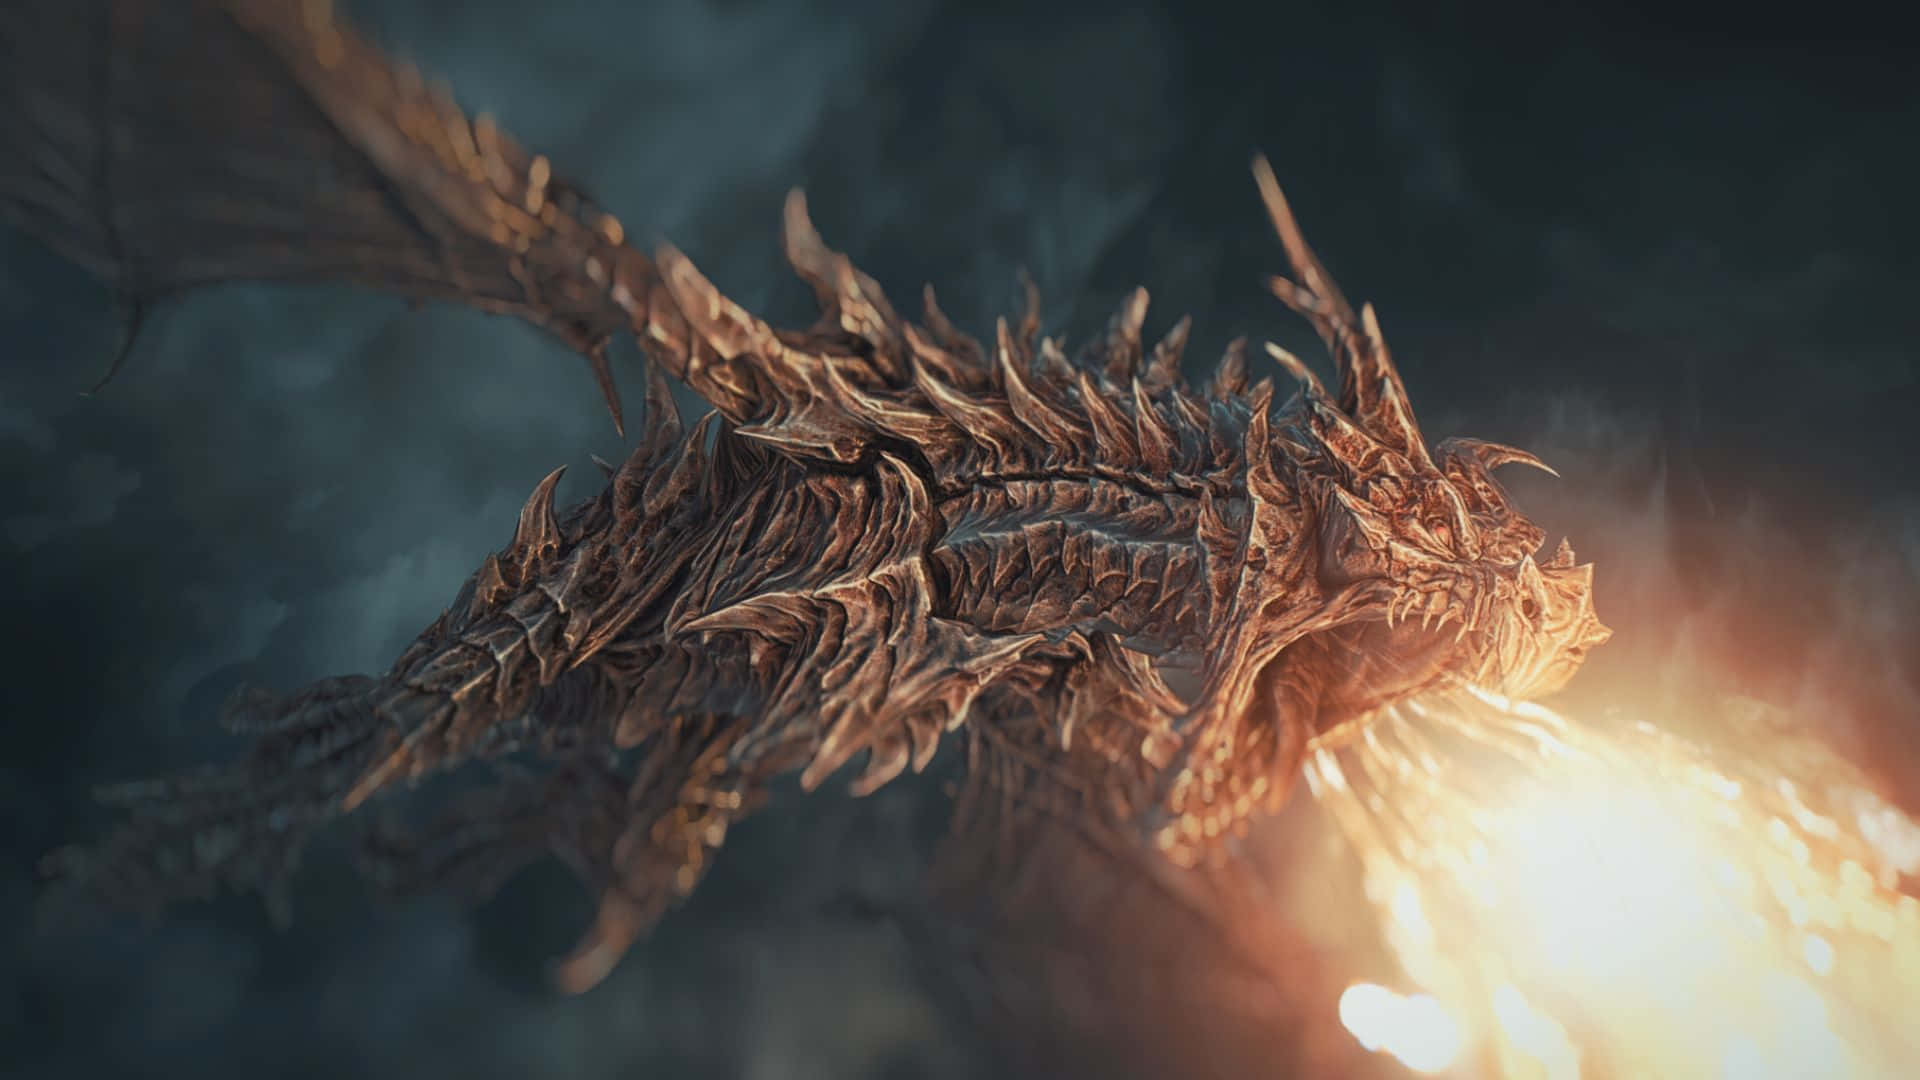 Alduin, the World-Eater, dominating the skies in Skyrim Wallpaper